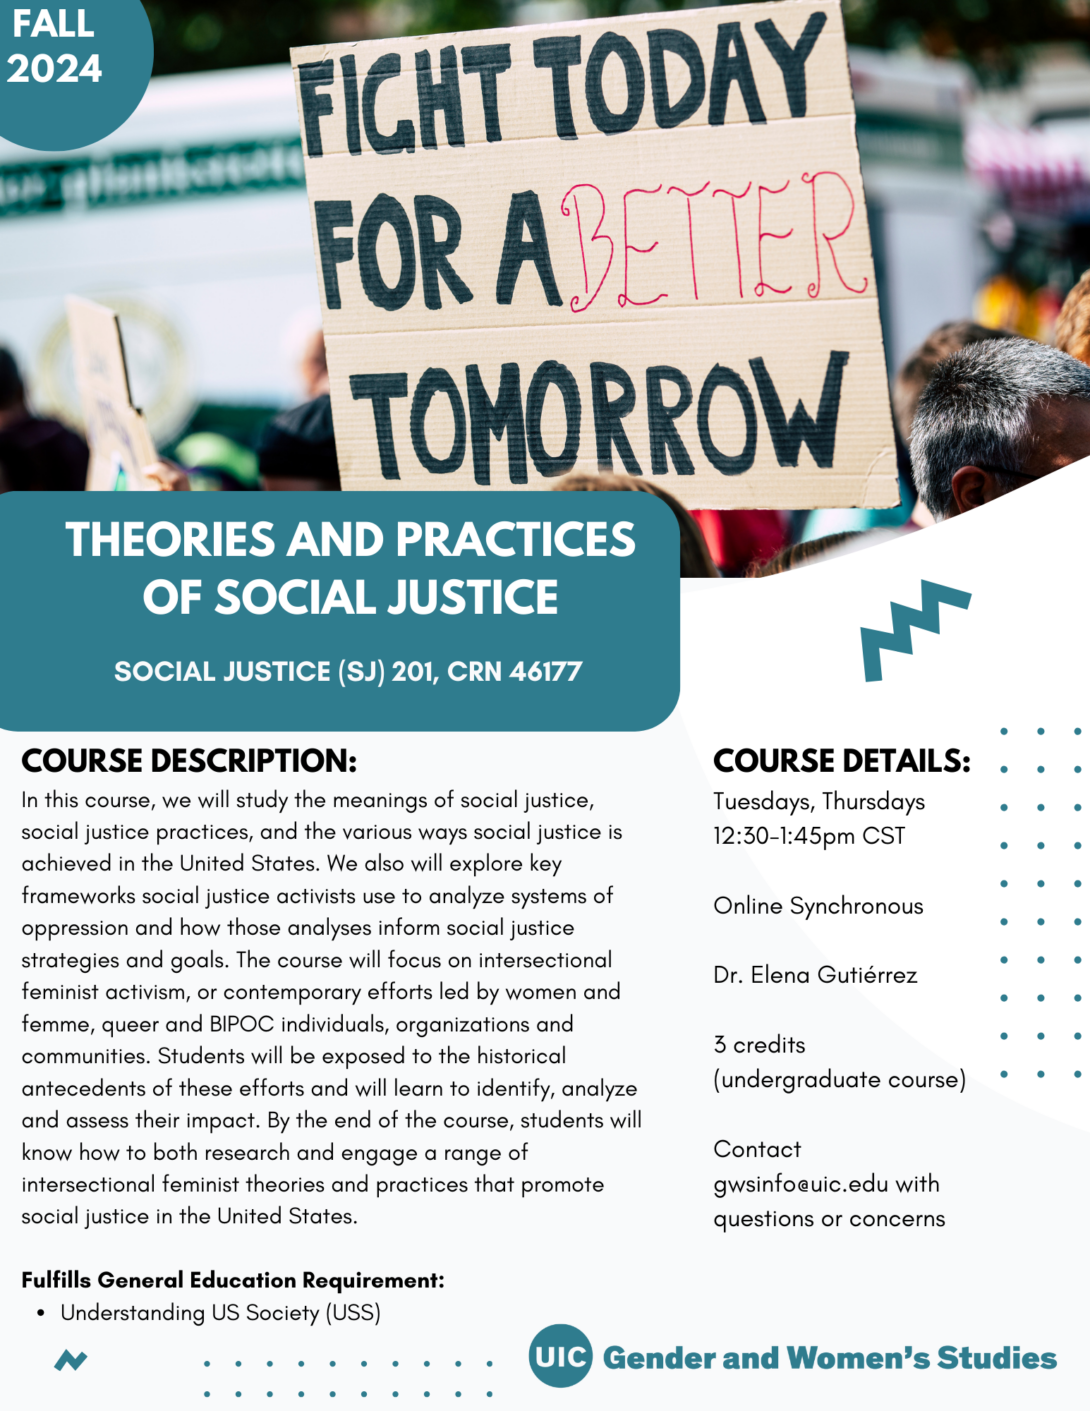 A flyer promoting the fall 2024 Theories and Practices of Social Justice course. The top portion of the flyer includes a photo of a sign that read Fight Today For A Better Tomorrow. In the top left corner is a teal circle with Fall 2024 inside it in white text. The bottom left portion of the photo is covered with a teal block that includes the course title in white text. Below that is the course description and course details in black text on a white background. A teal GWS logo appears in the bottom right of the flyer. Parallel lines of teal dots and teal geometric designs decorate the page.